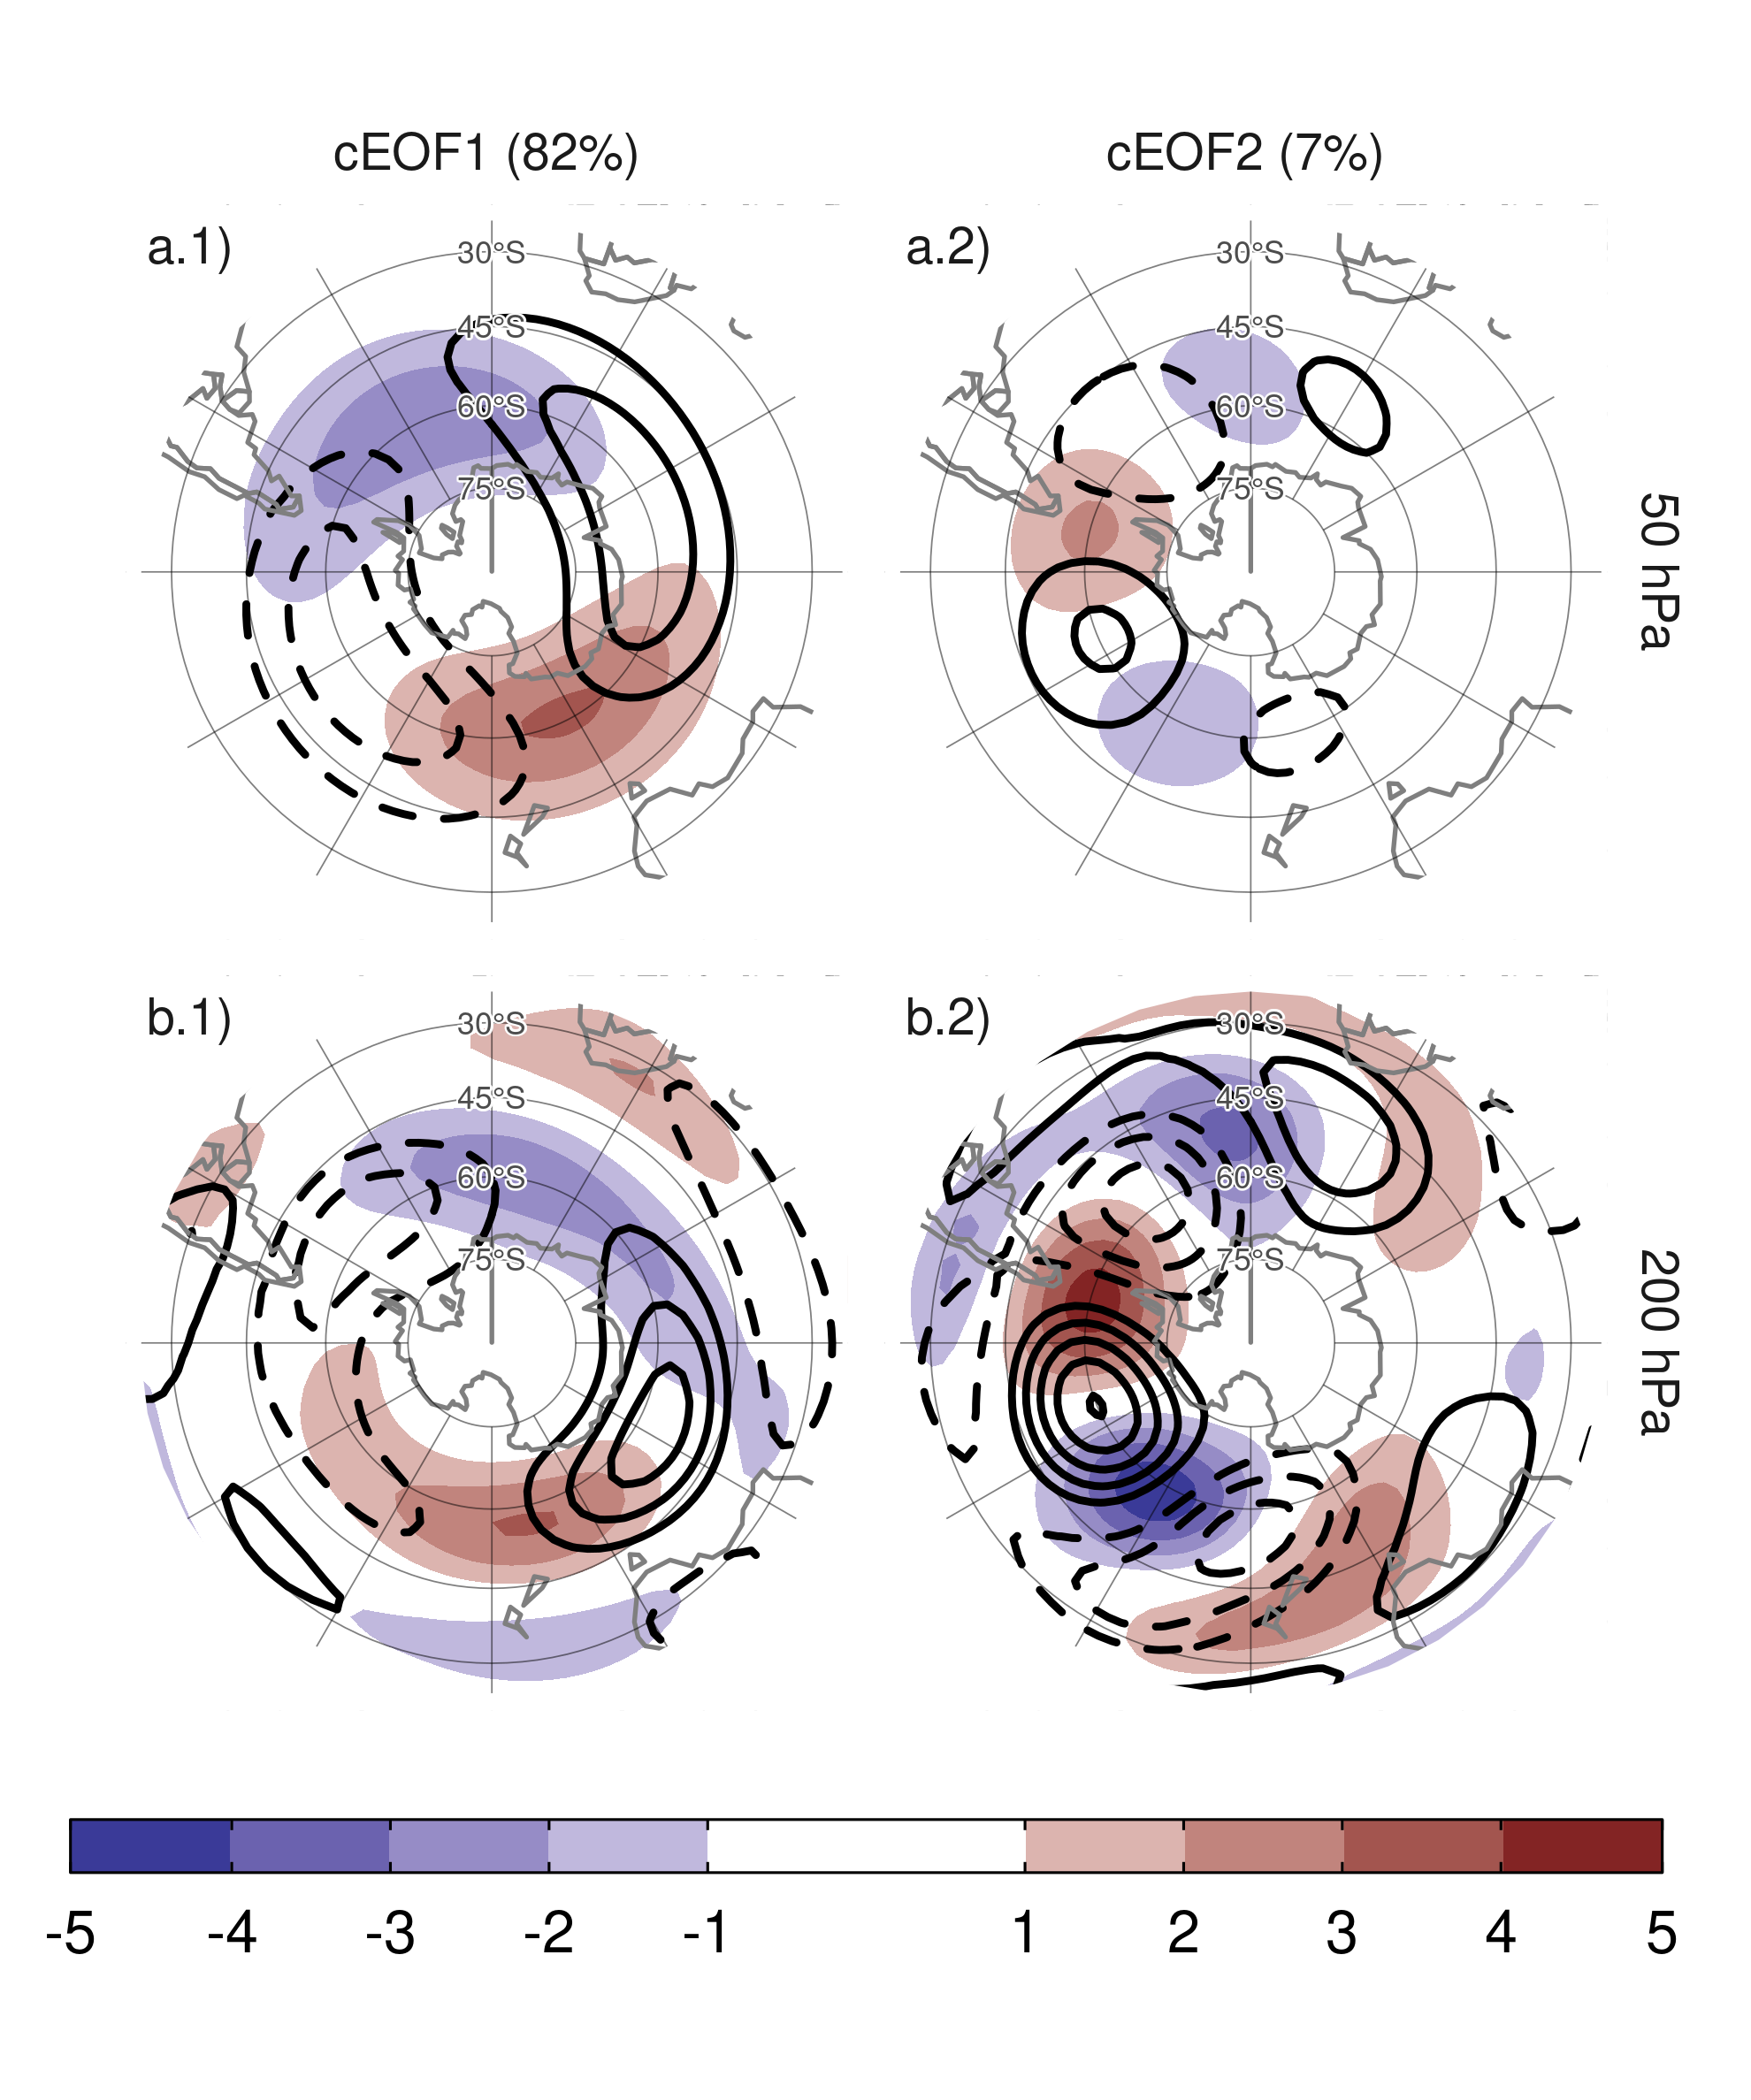 Spatial patterns for the two leading cEOFs of SON geopotential height zonal anomalies at 50 hPa and 200 hPa for the 1979 – 2019 period. The shading (contours) corresponds to 0º (90º) phase. Arbitrary units. The proportion of variance explained for each mode with respect to the zonal mean is indicated in parenthesis.